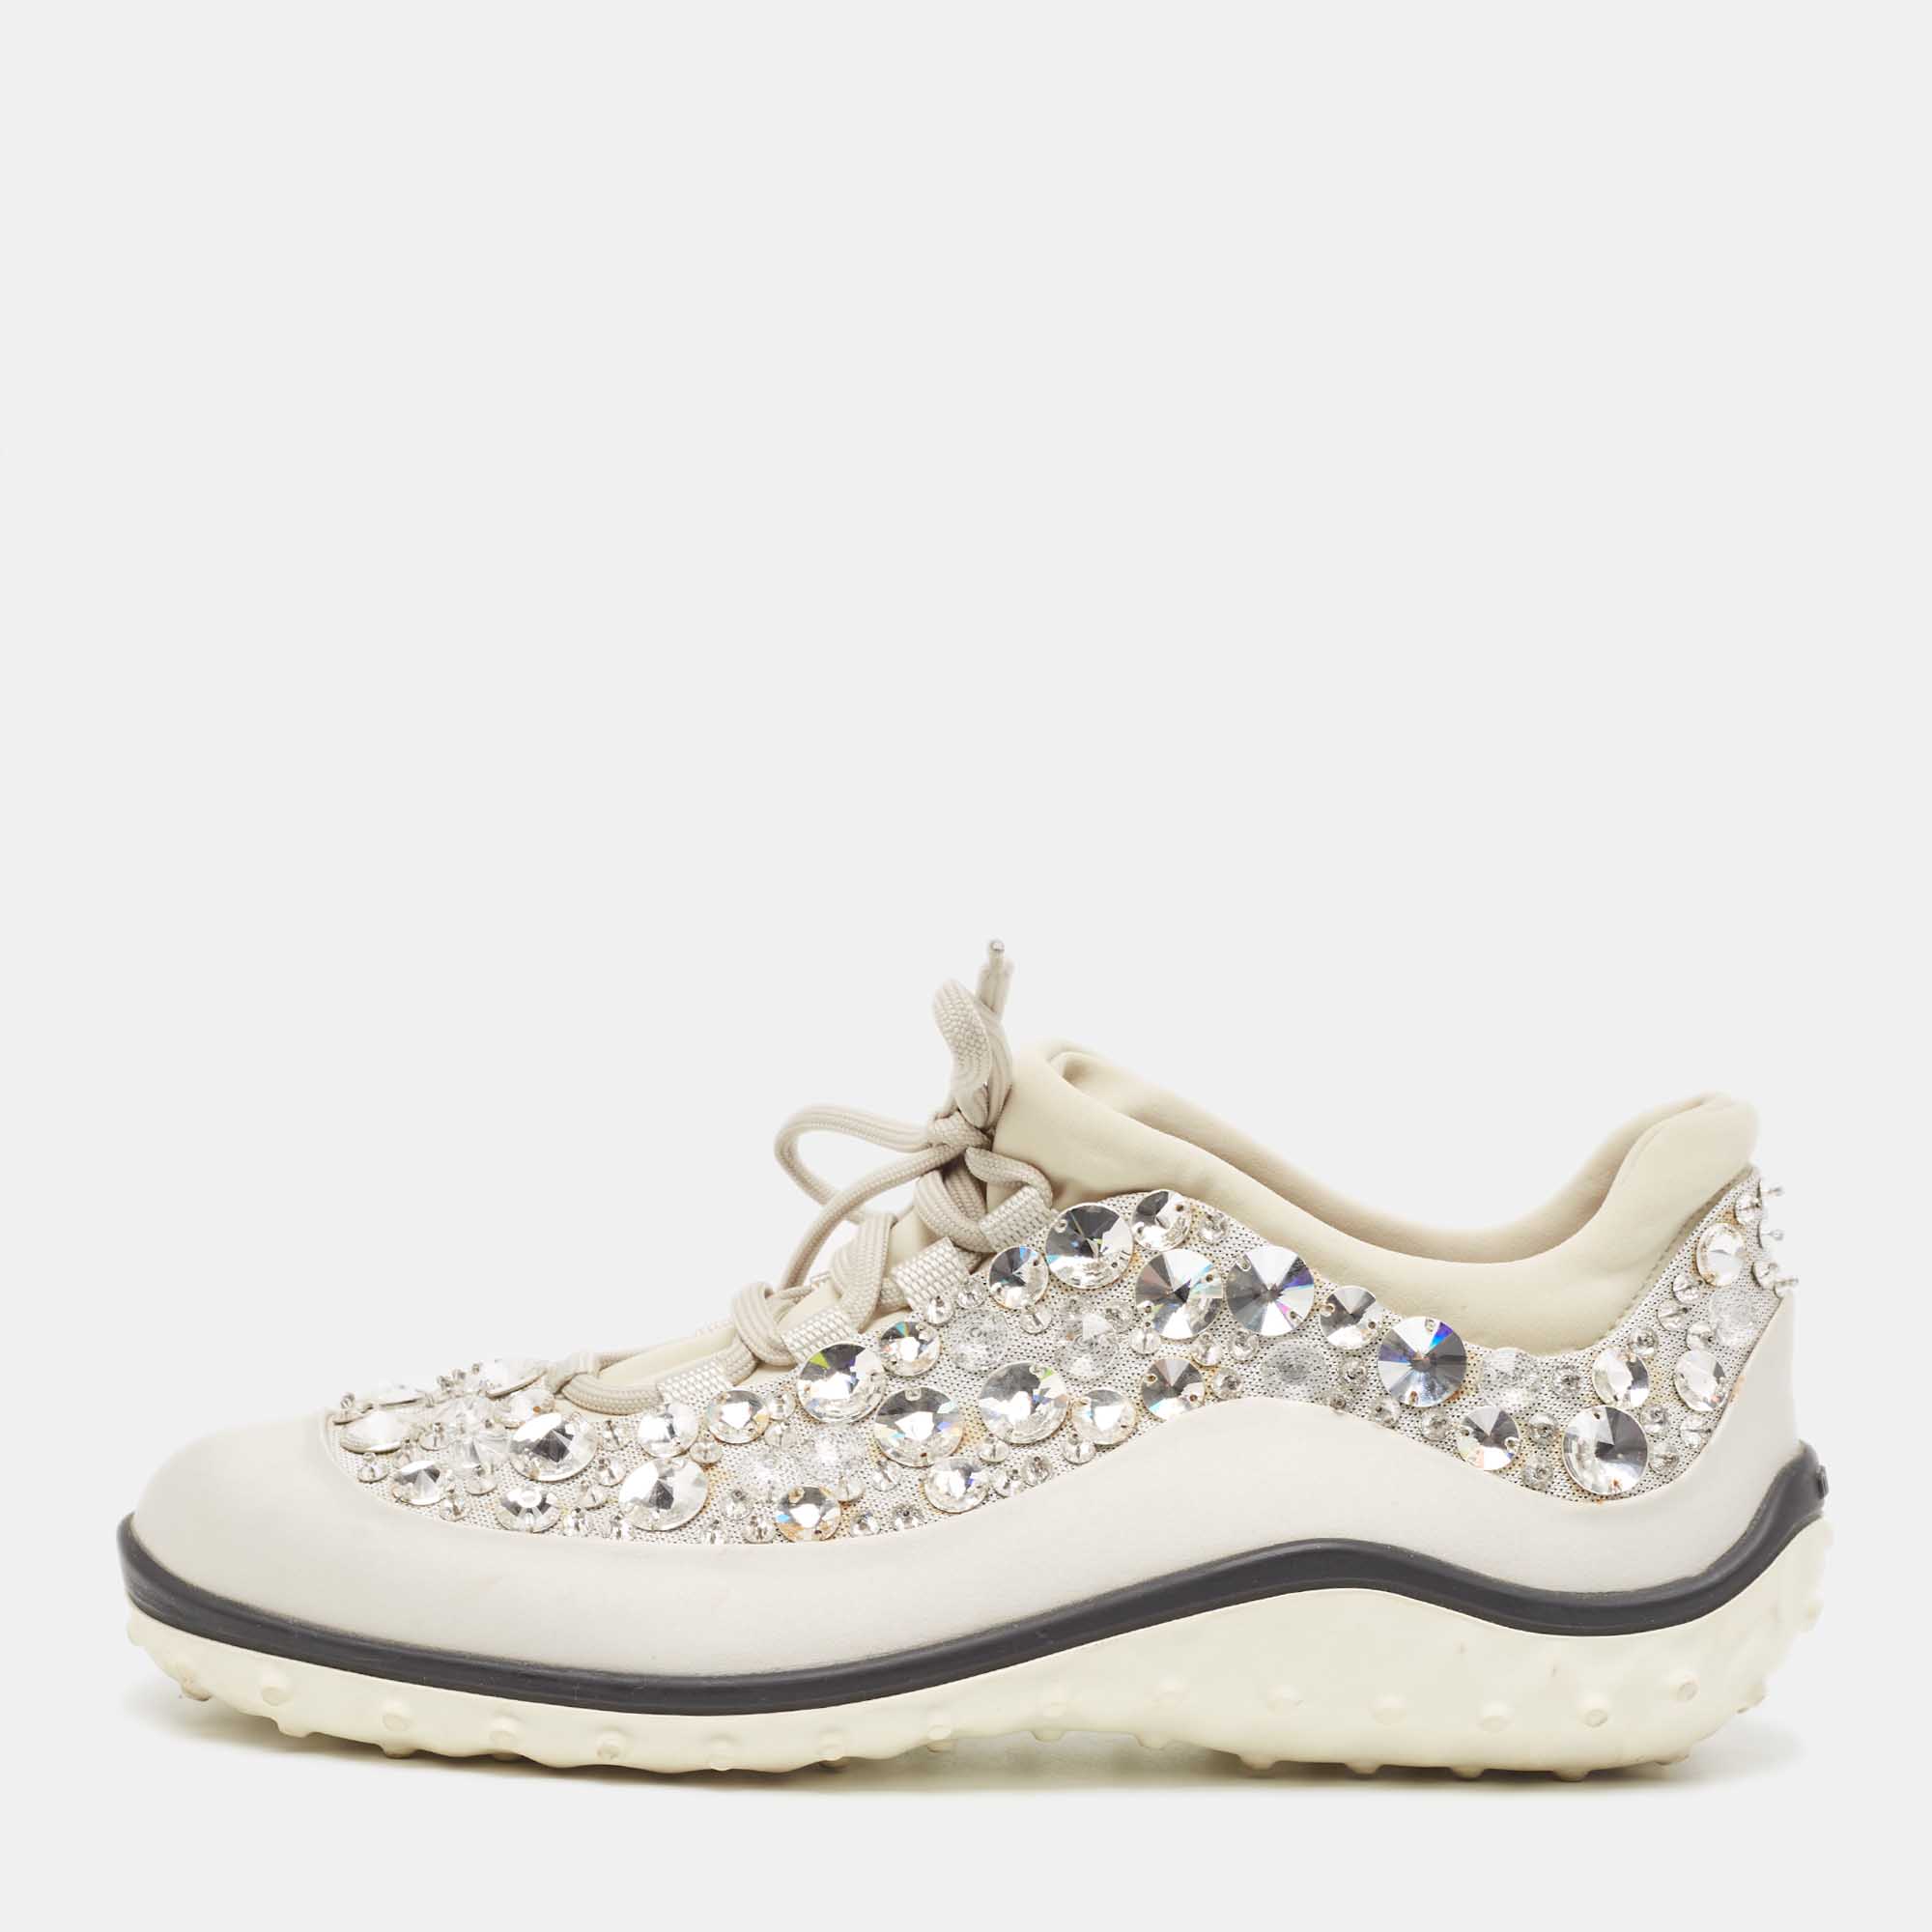 

Miu Miu Silver Satin Astro Crystal Embellished Low Top Sneakers Size